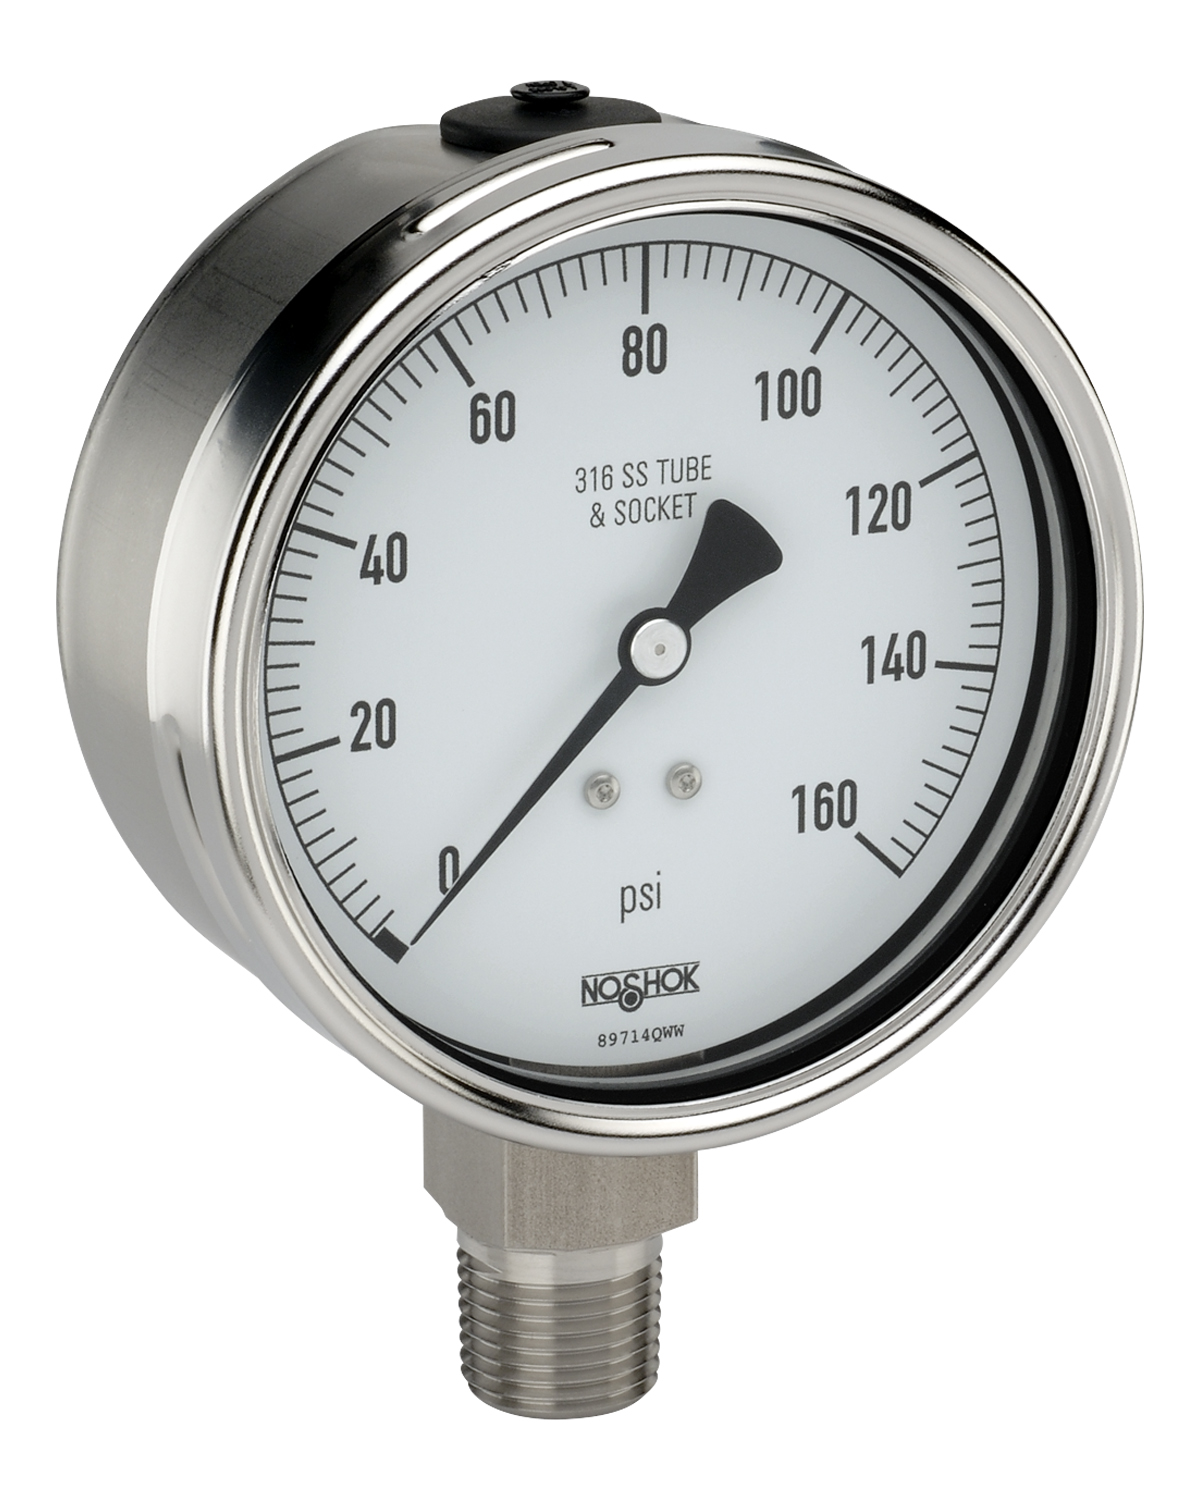 40-500-30-psi/kPa 400/500 Series All Stainless Steel Dry and Liquid Filled Pressure Gauges